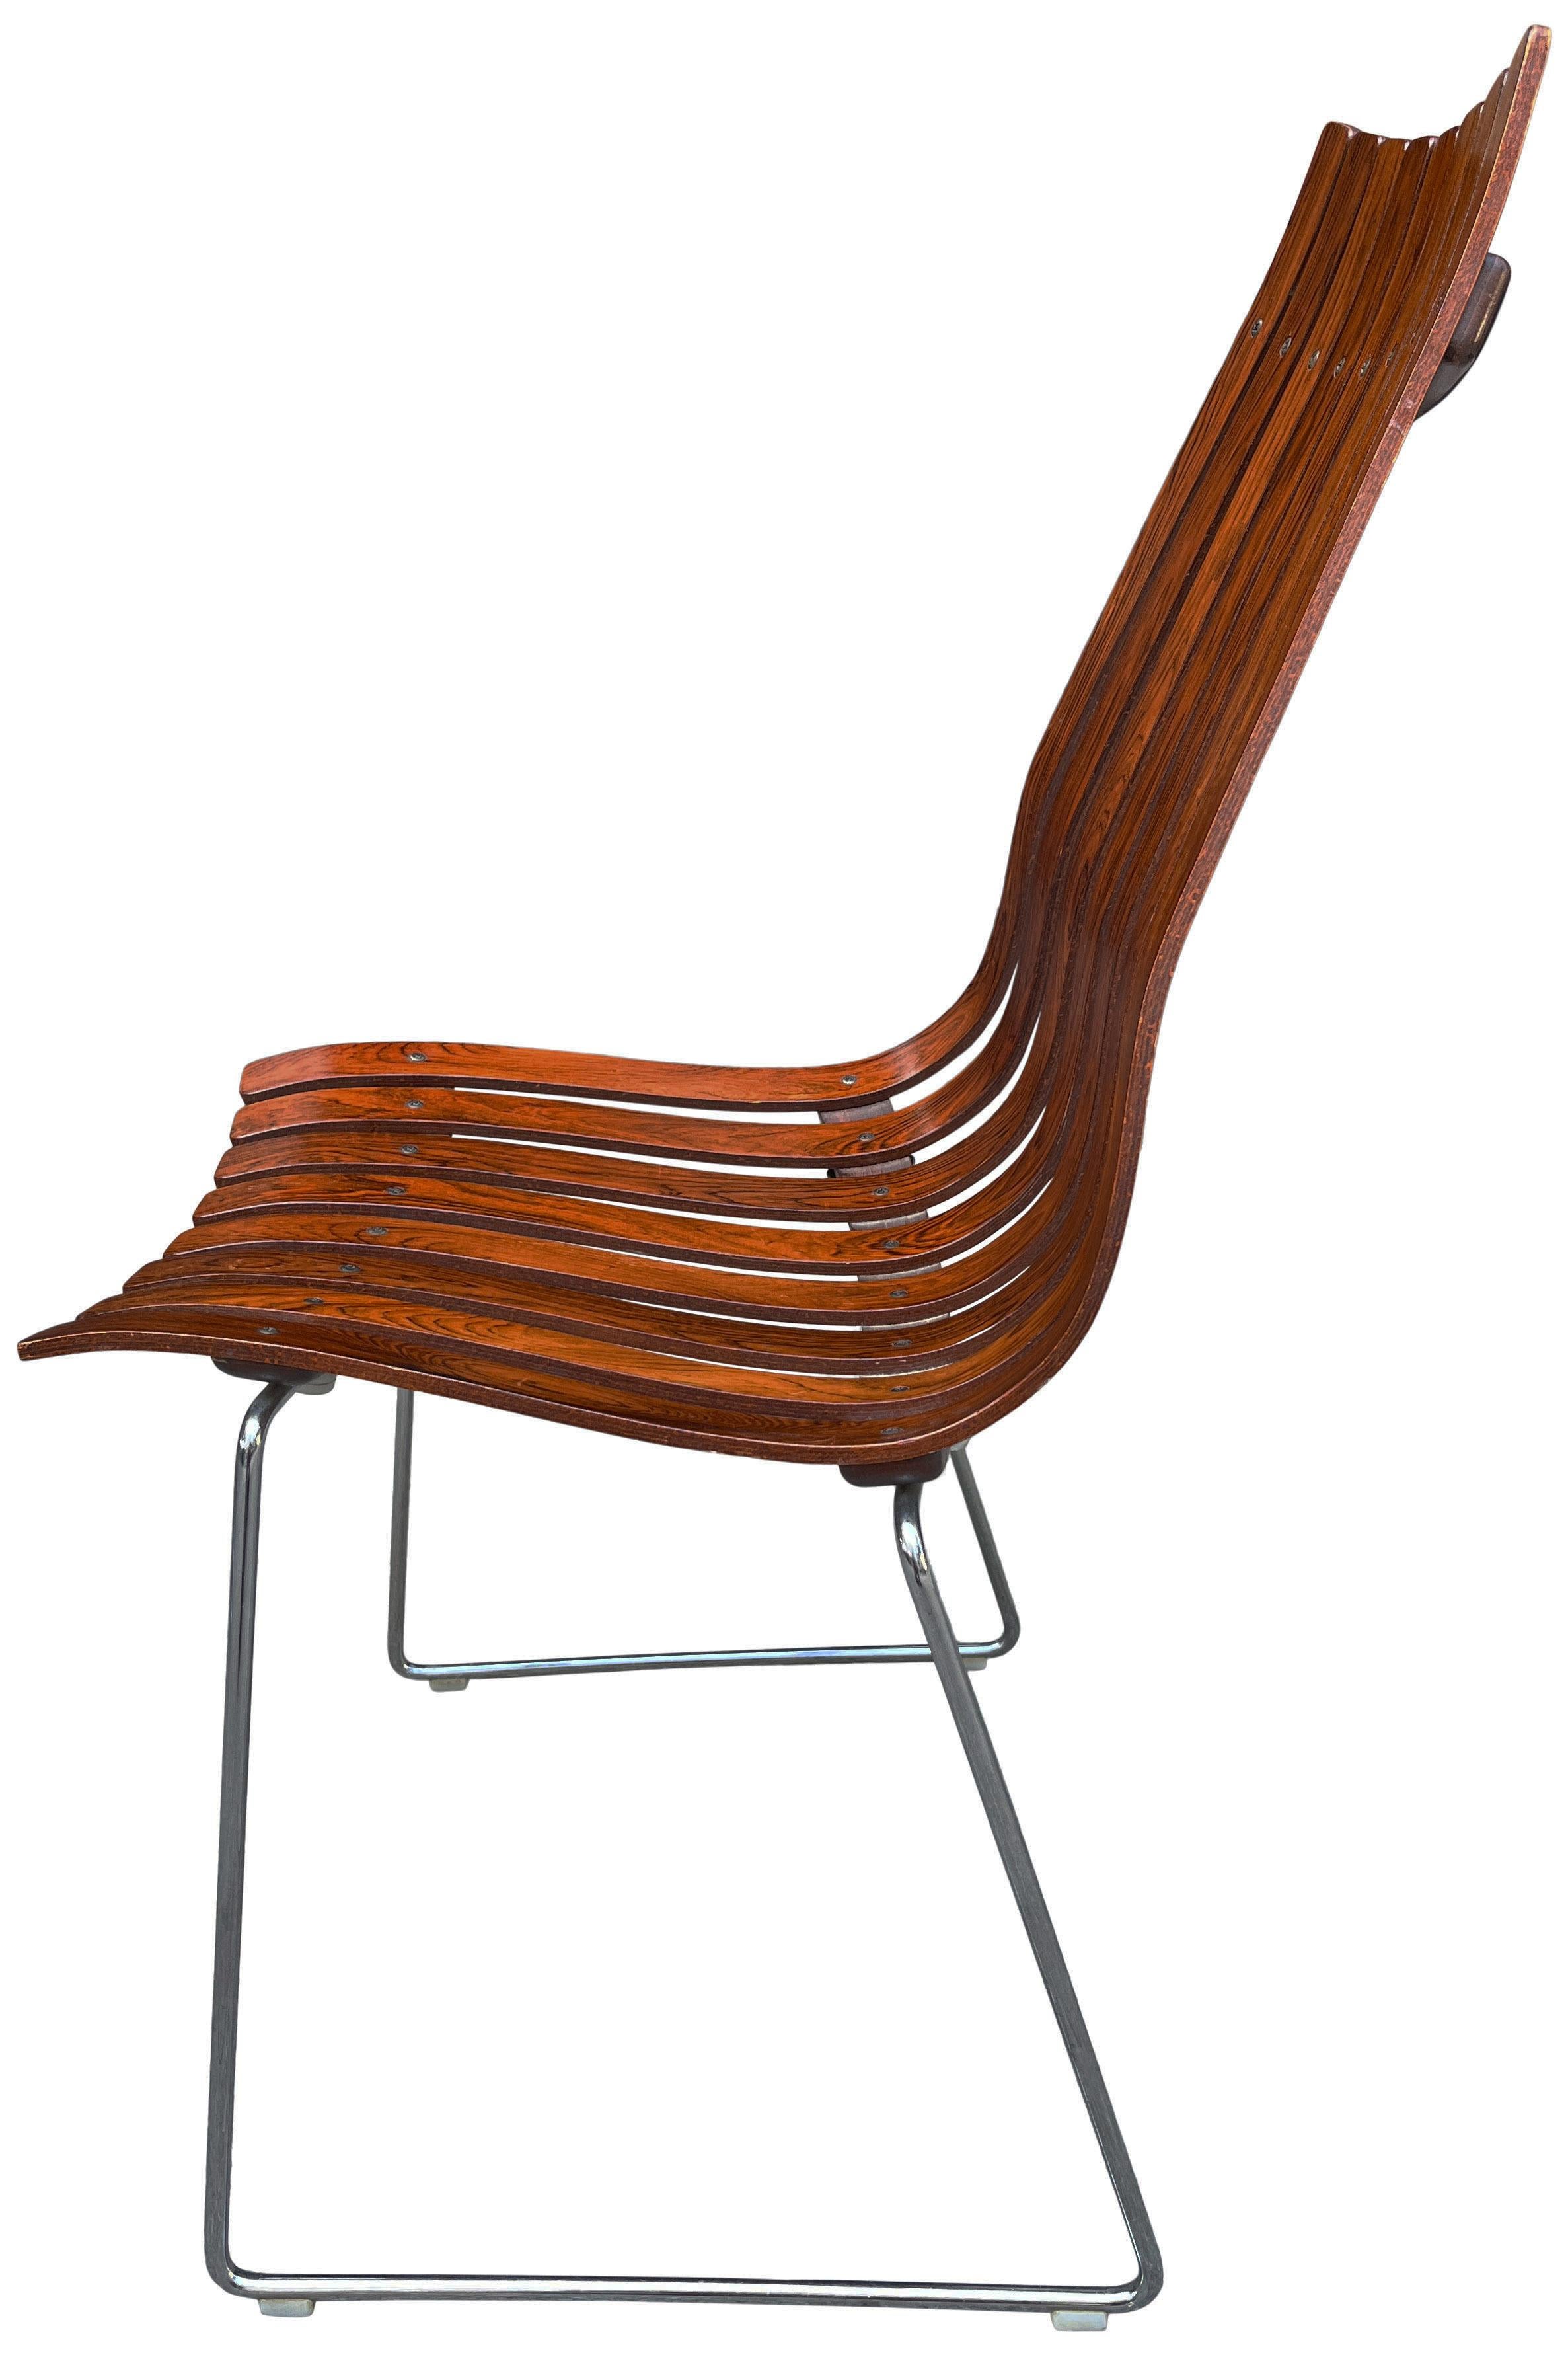 Midcentury Scandia Chairs by Hans Brattrud for Hove Mobler For Sale 2